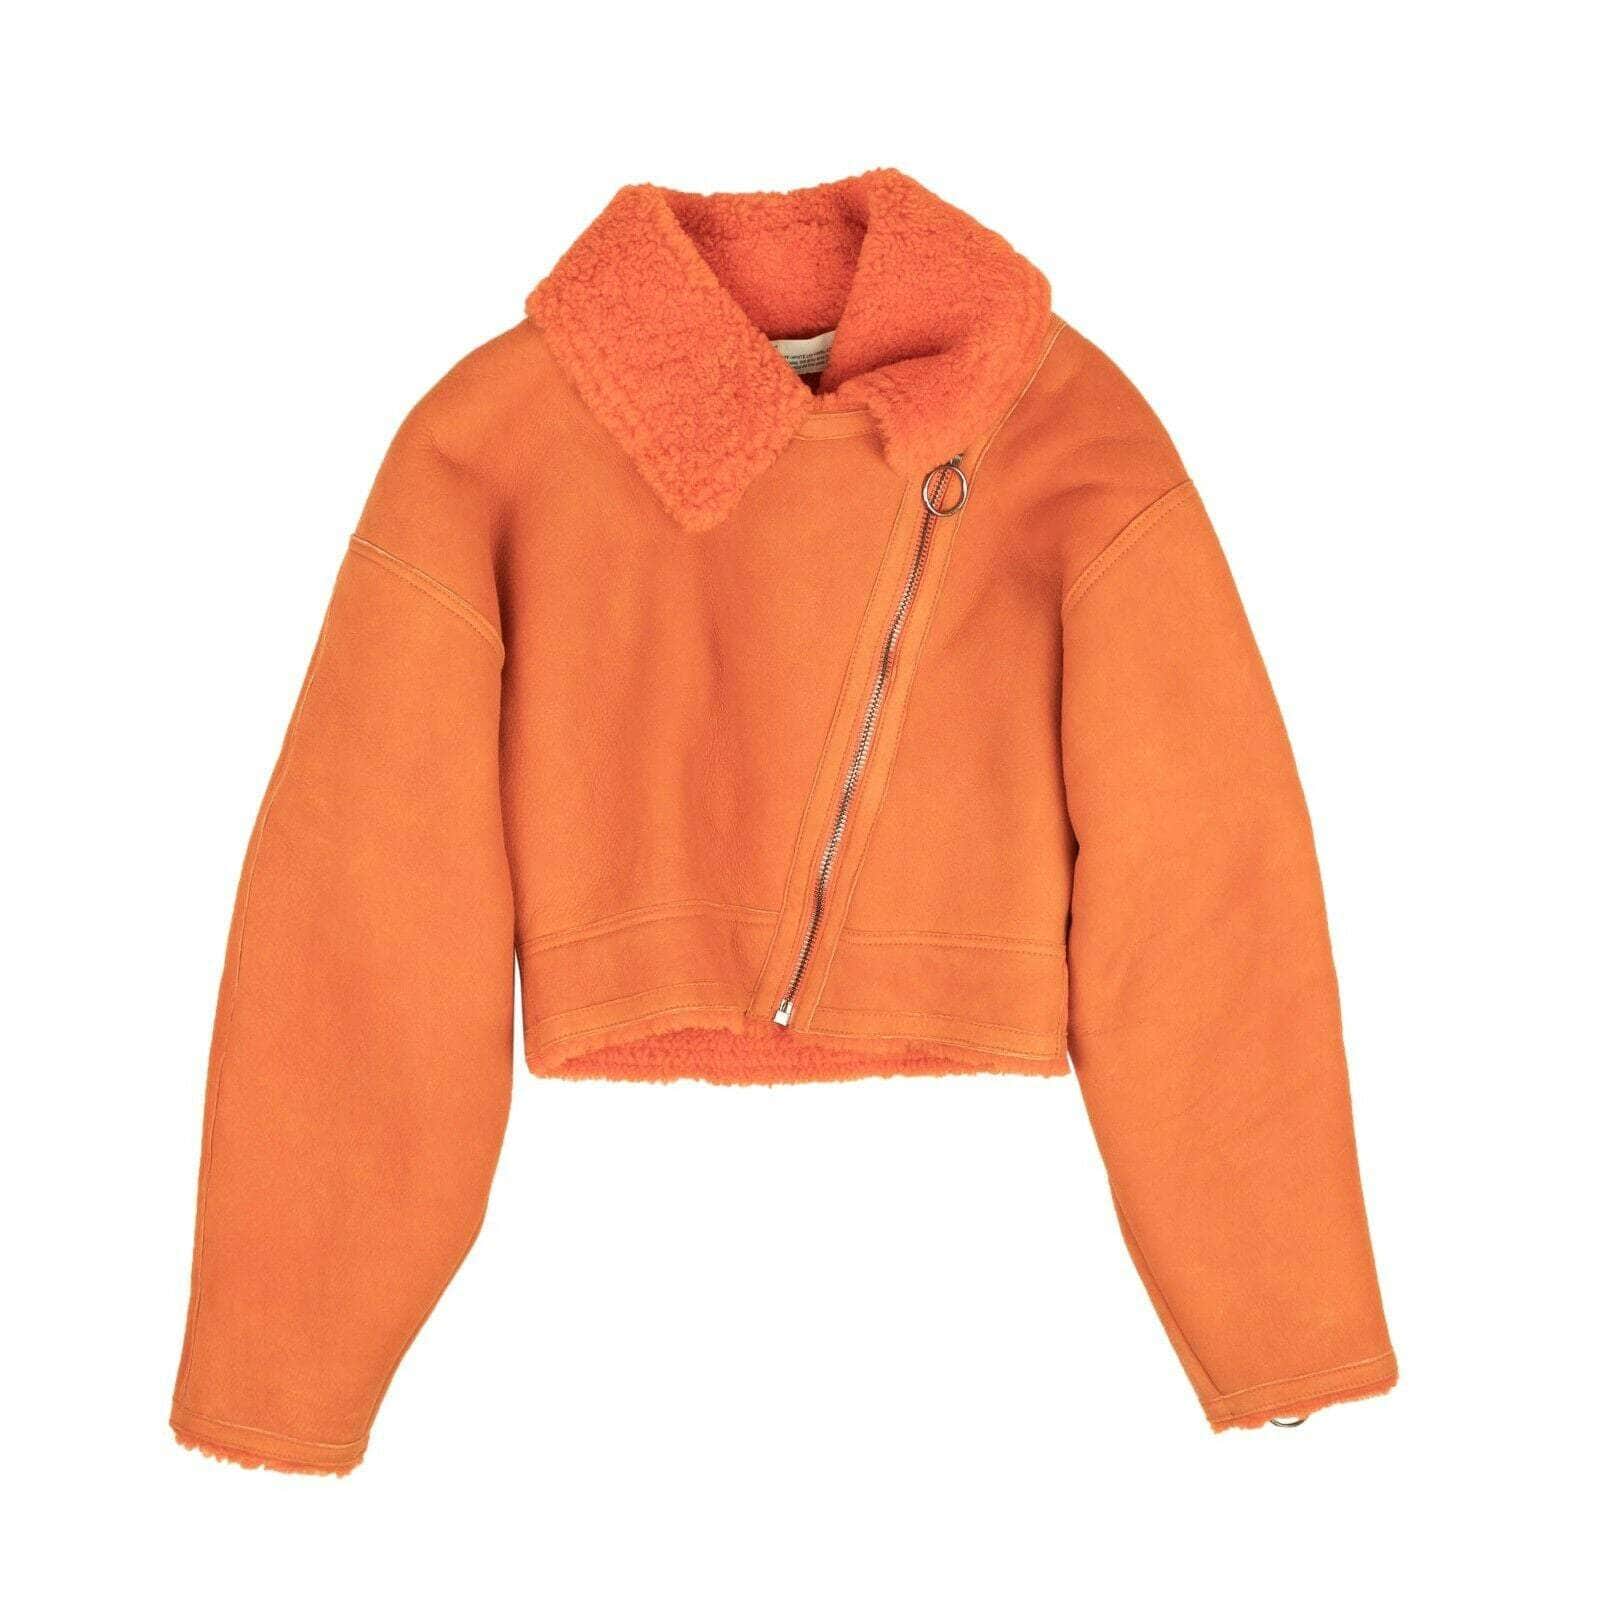 OFF-WHITE c/o VIRGIL ABLOH 2000-5000, channelenable-all, chicmi, couponcollection, gender-womens, main-clothing, off-white-c-o-virgil-abloh, size-40 40 Orange Cropped Shearling Jacket 82NGG-OW-210/40 82NGG-OW-210/40